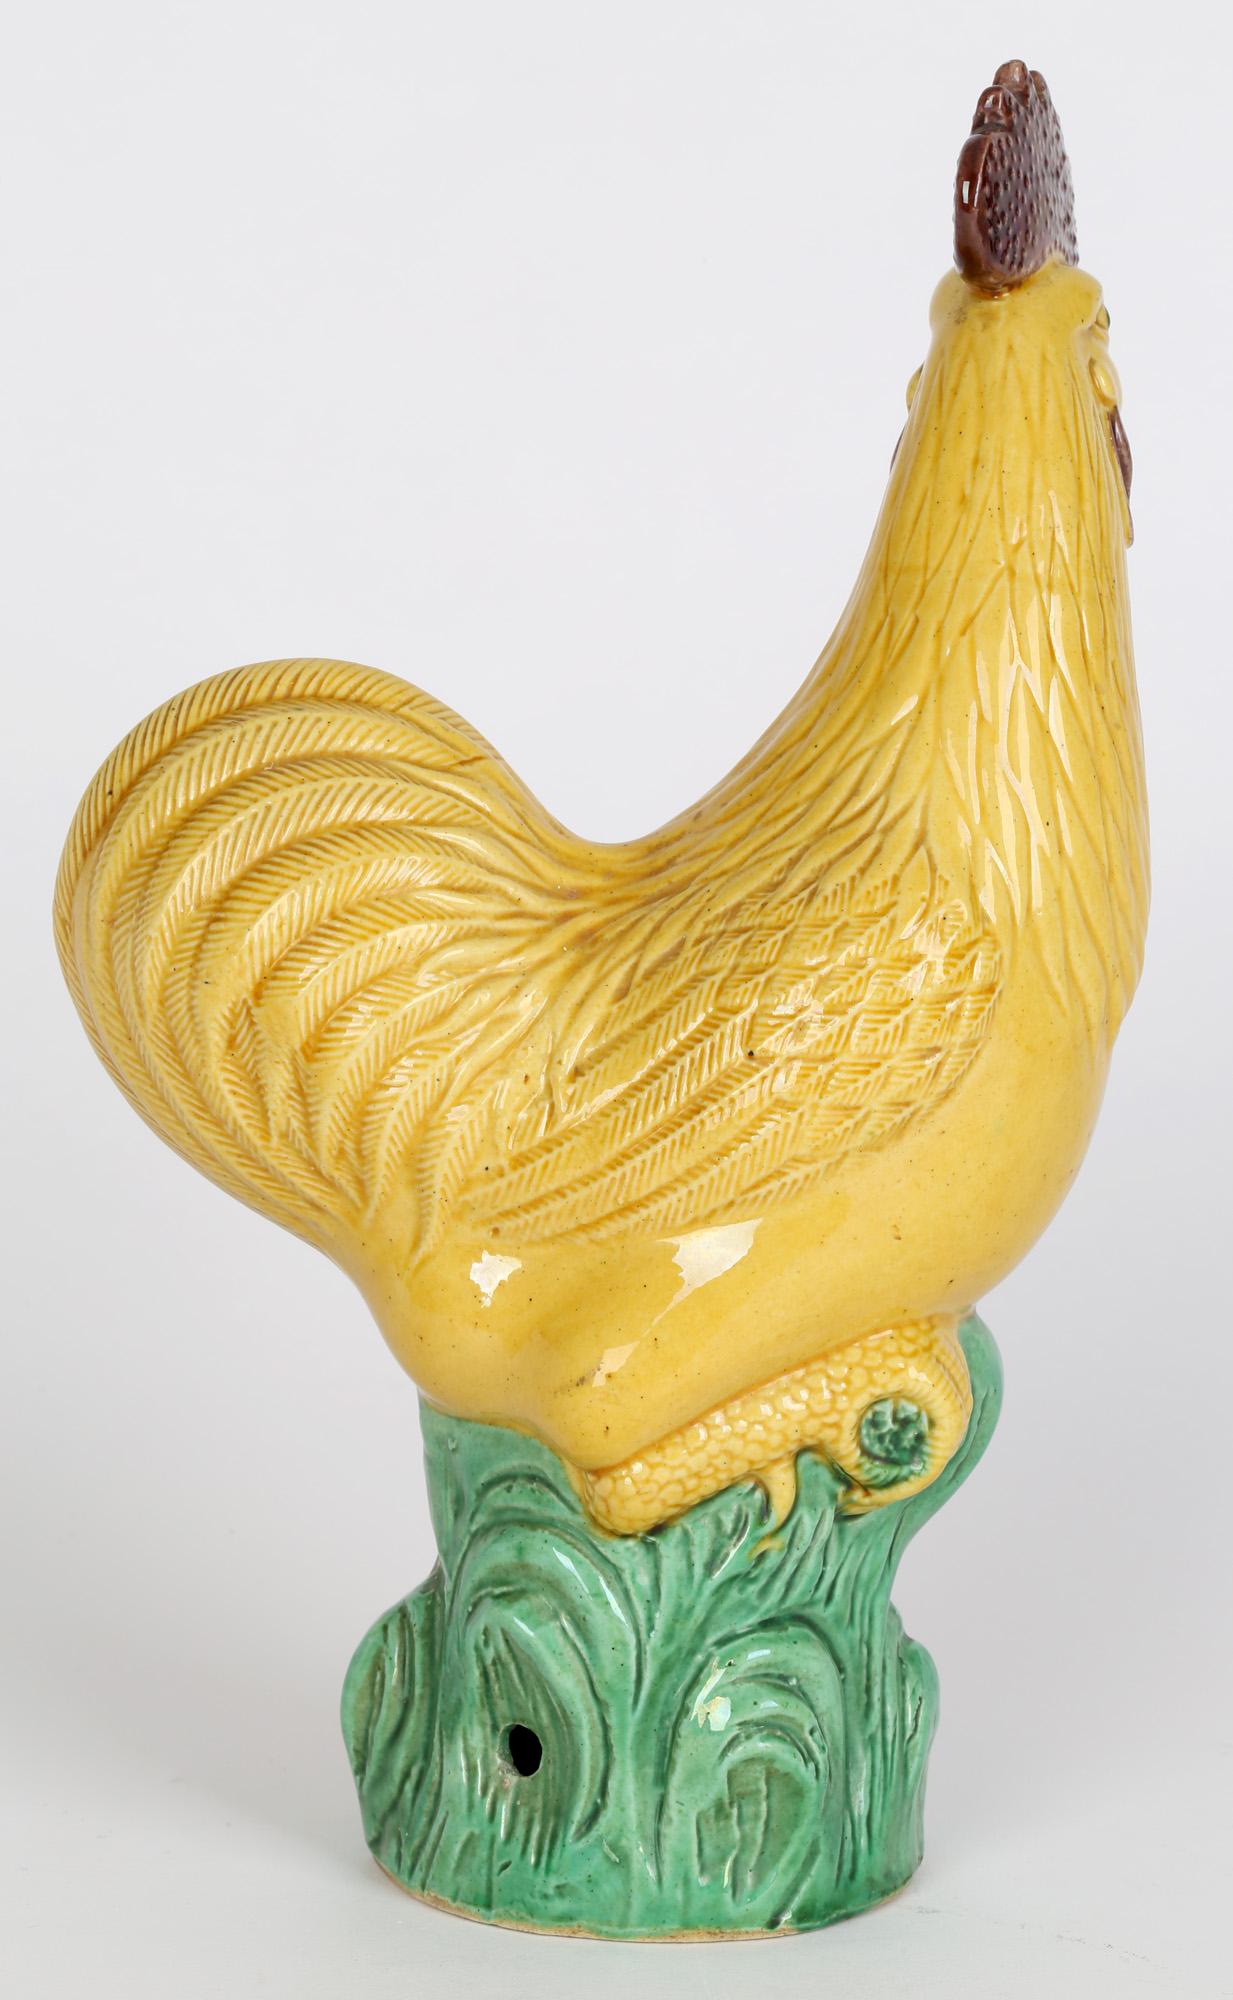 A scarce and stylish Chinese Qing pottery figure of a cockerel dating from the 19th or early 20th century. The hollow lightly potted figure is very finely detailed and portrays the cockerel standing raised on a stylized grass mound with good detail